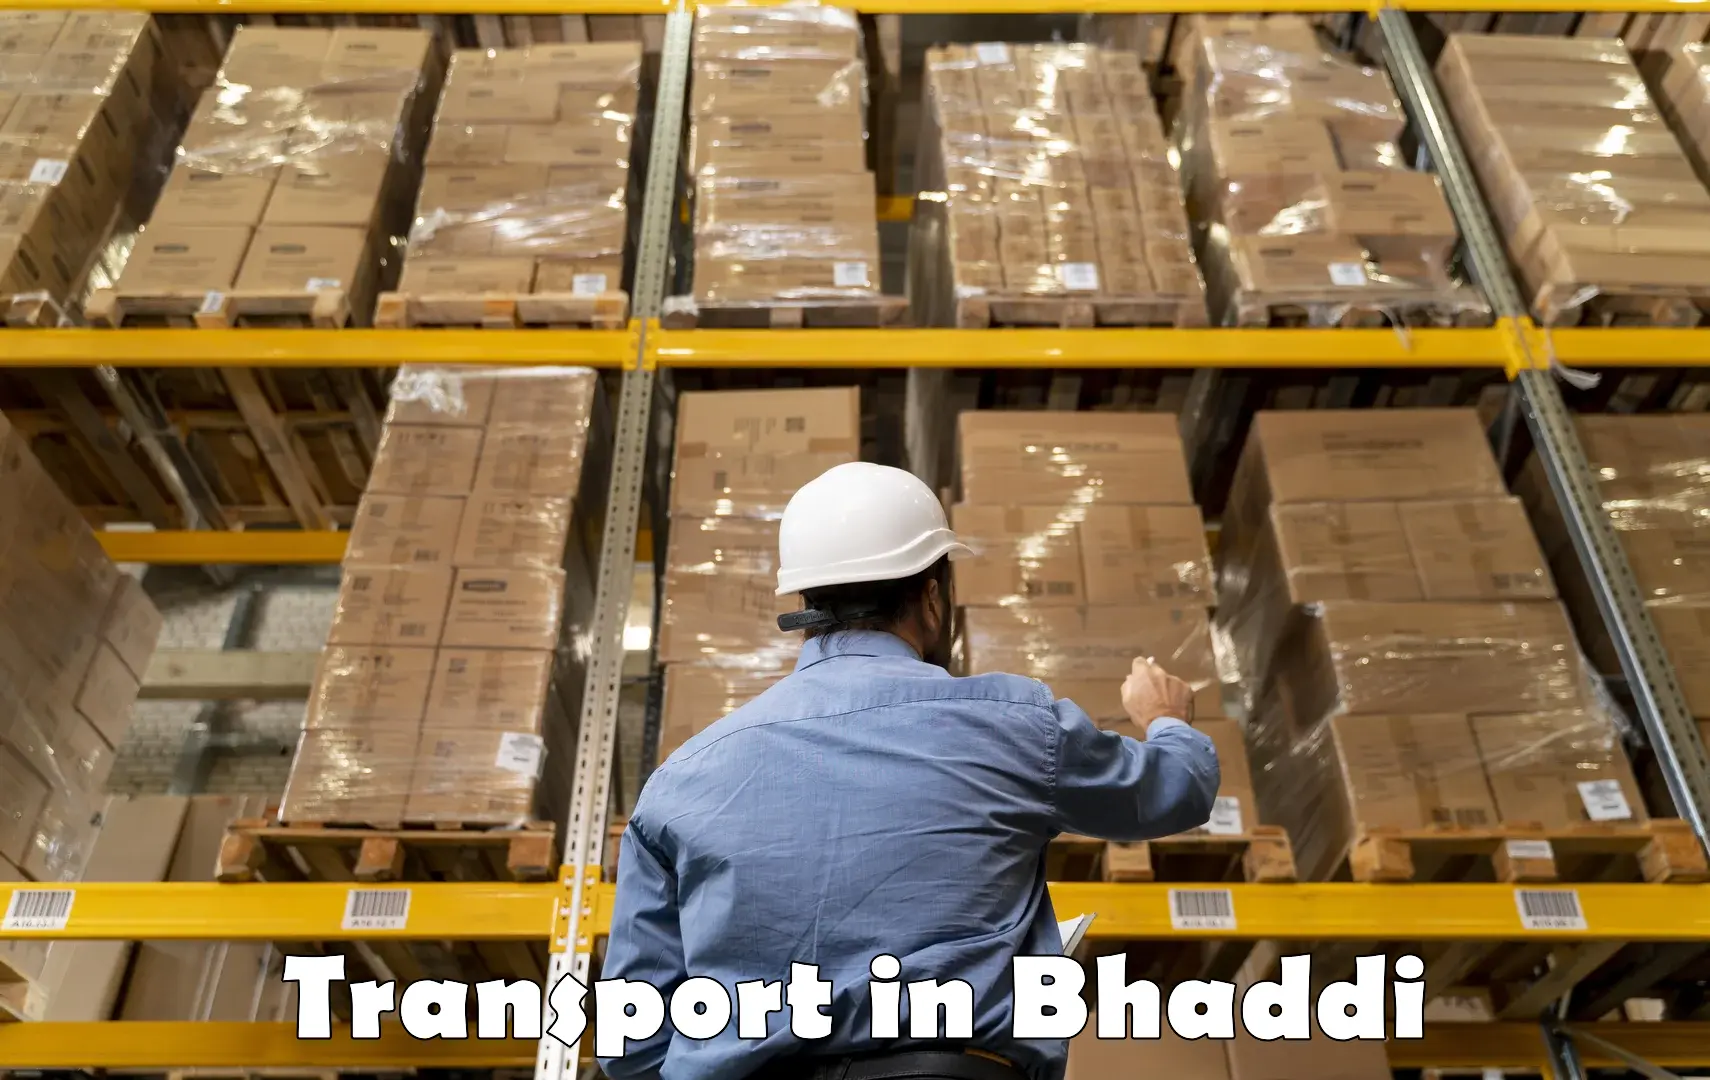 Road transport services in Bhaddi